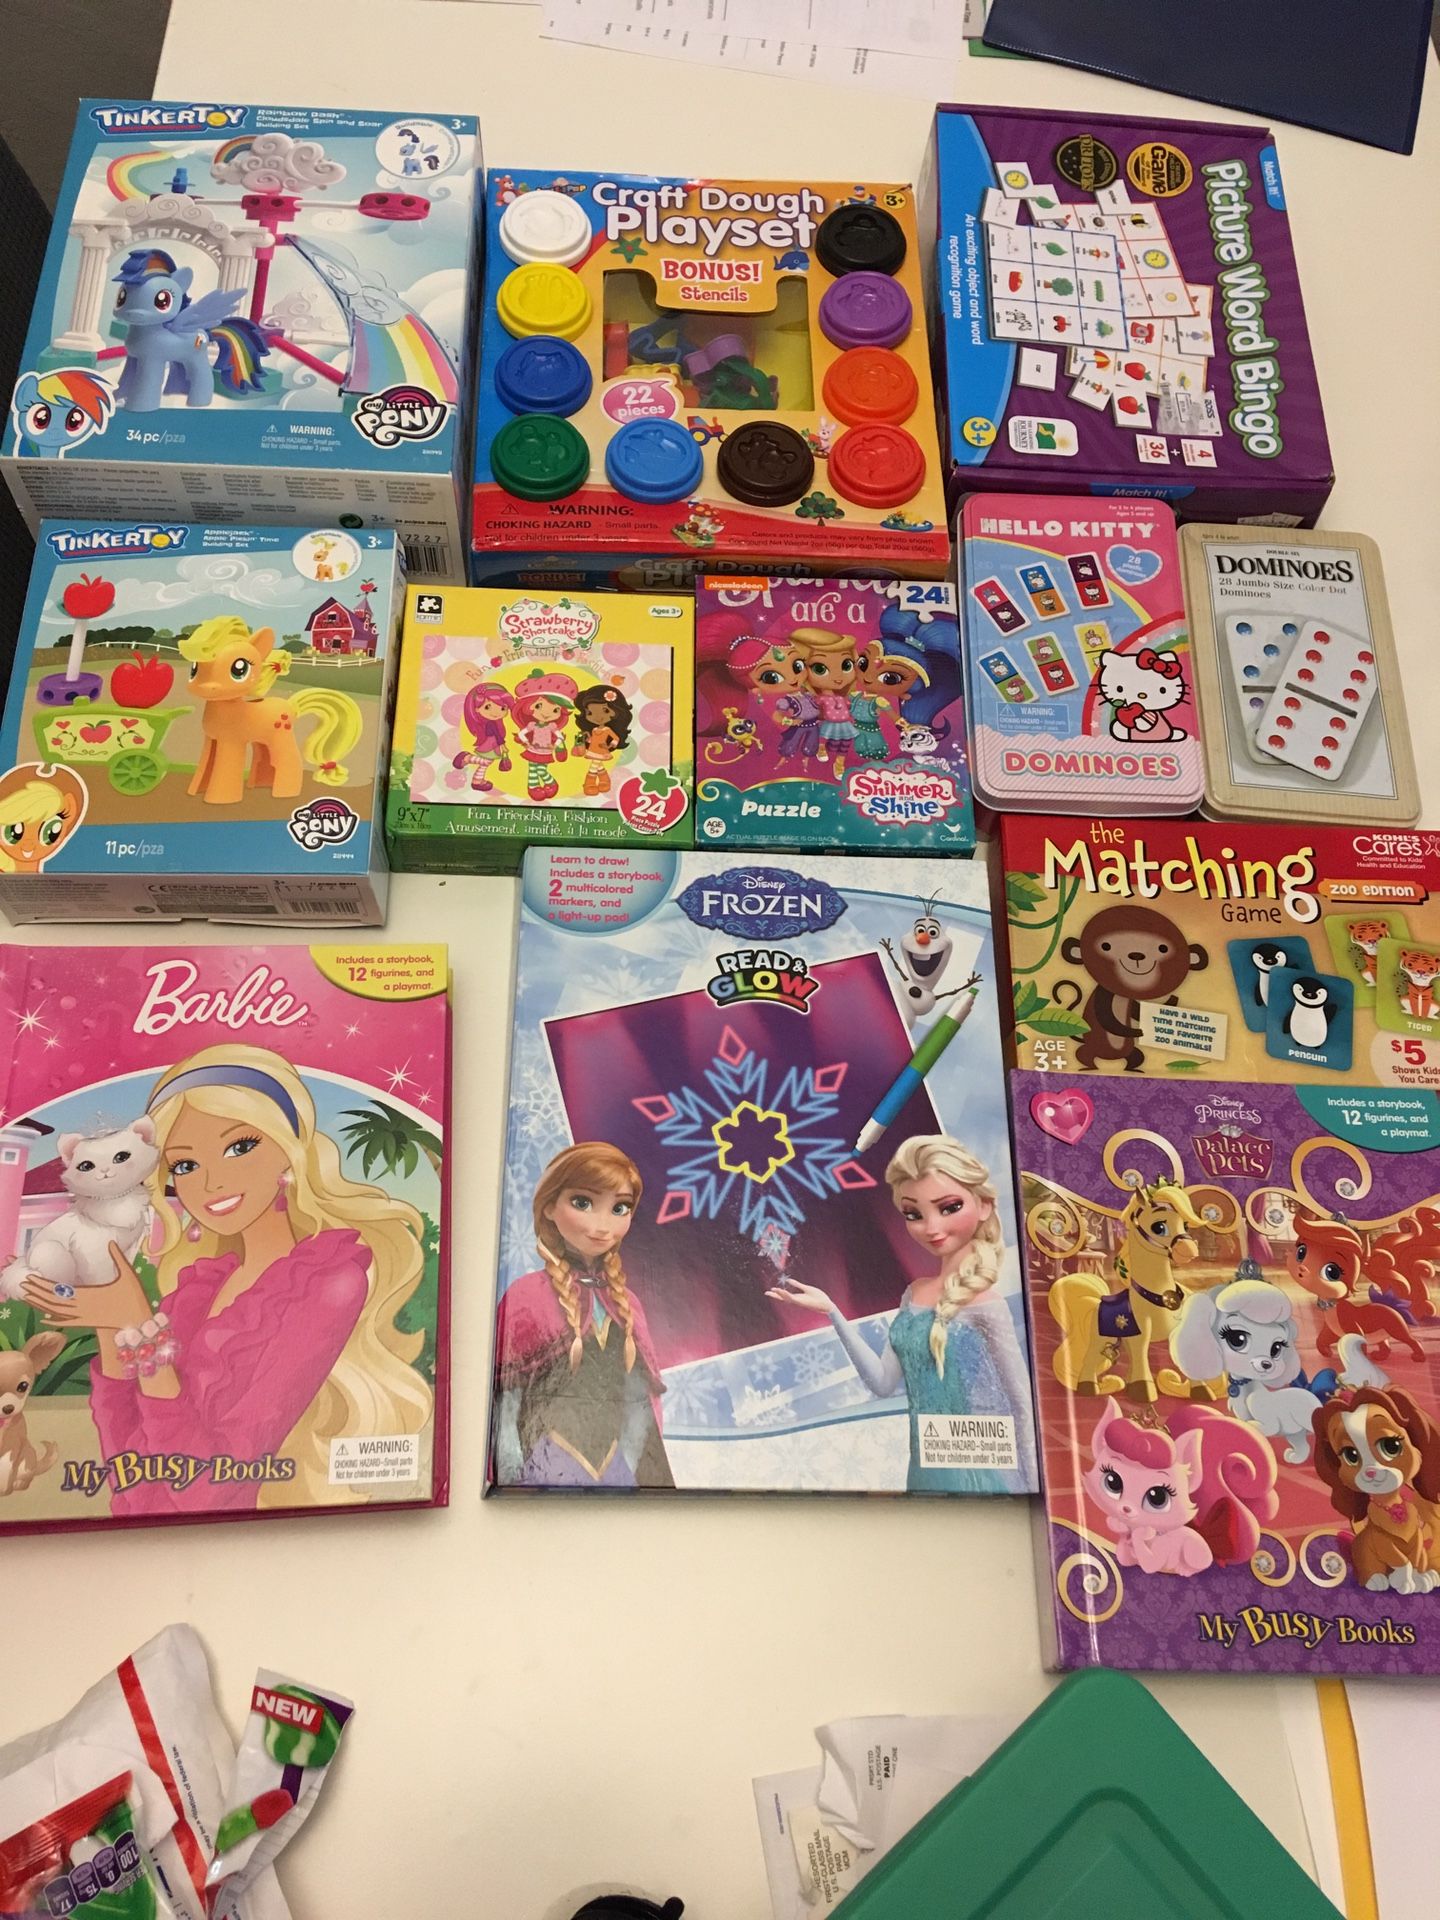 Puzzle books, games and play sets